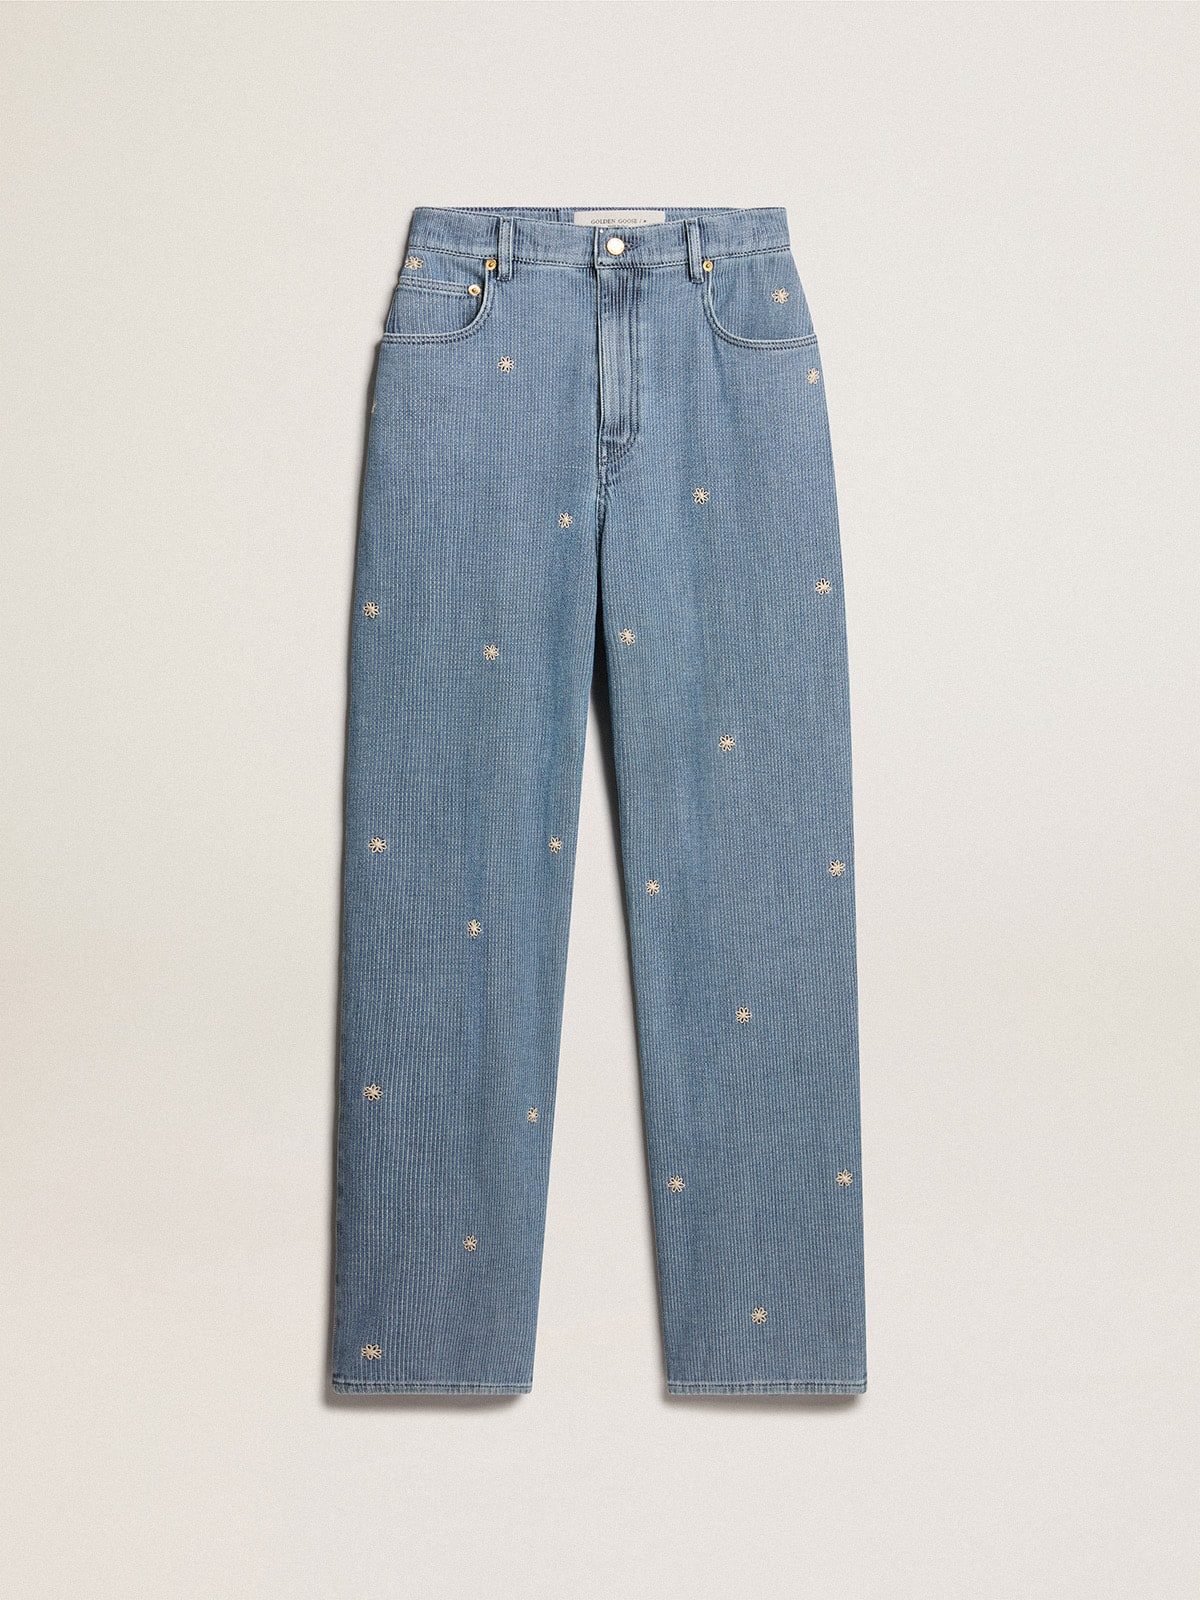 Women's trousers: pants and jeans for womens | Golden Goose